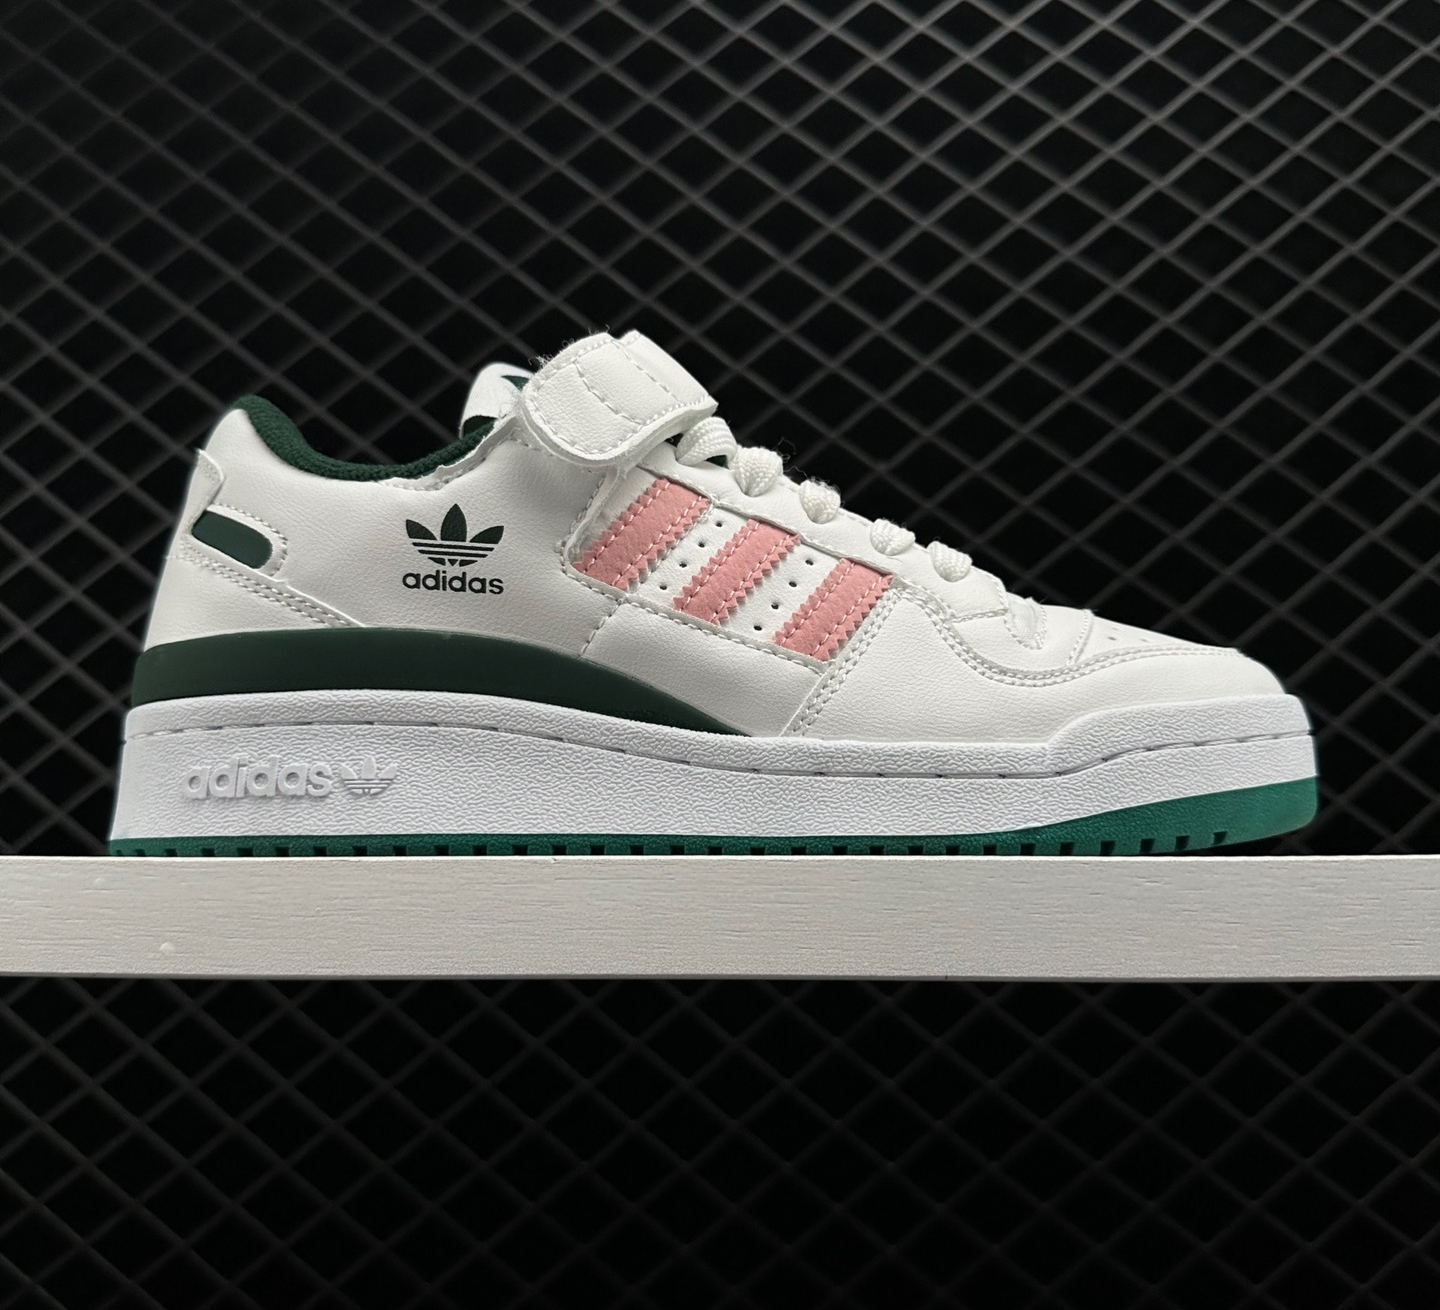 Adidas Originals Forum Low 84 White Green Pink - Stylish and Trendy Sneakers